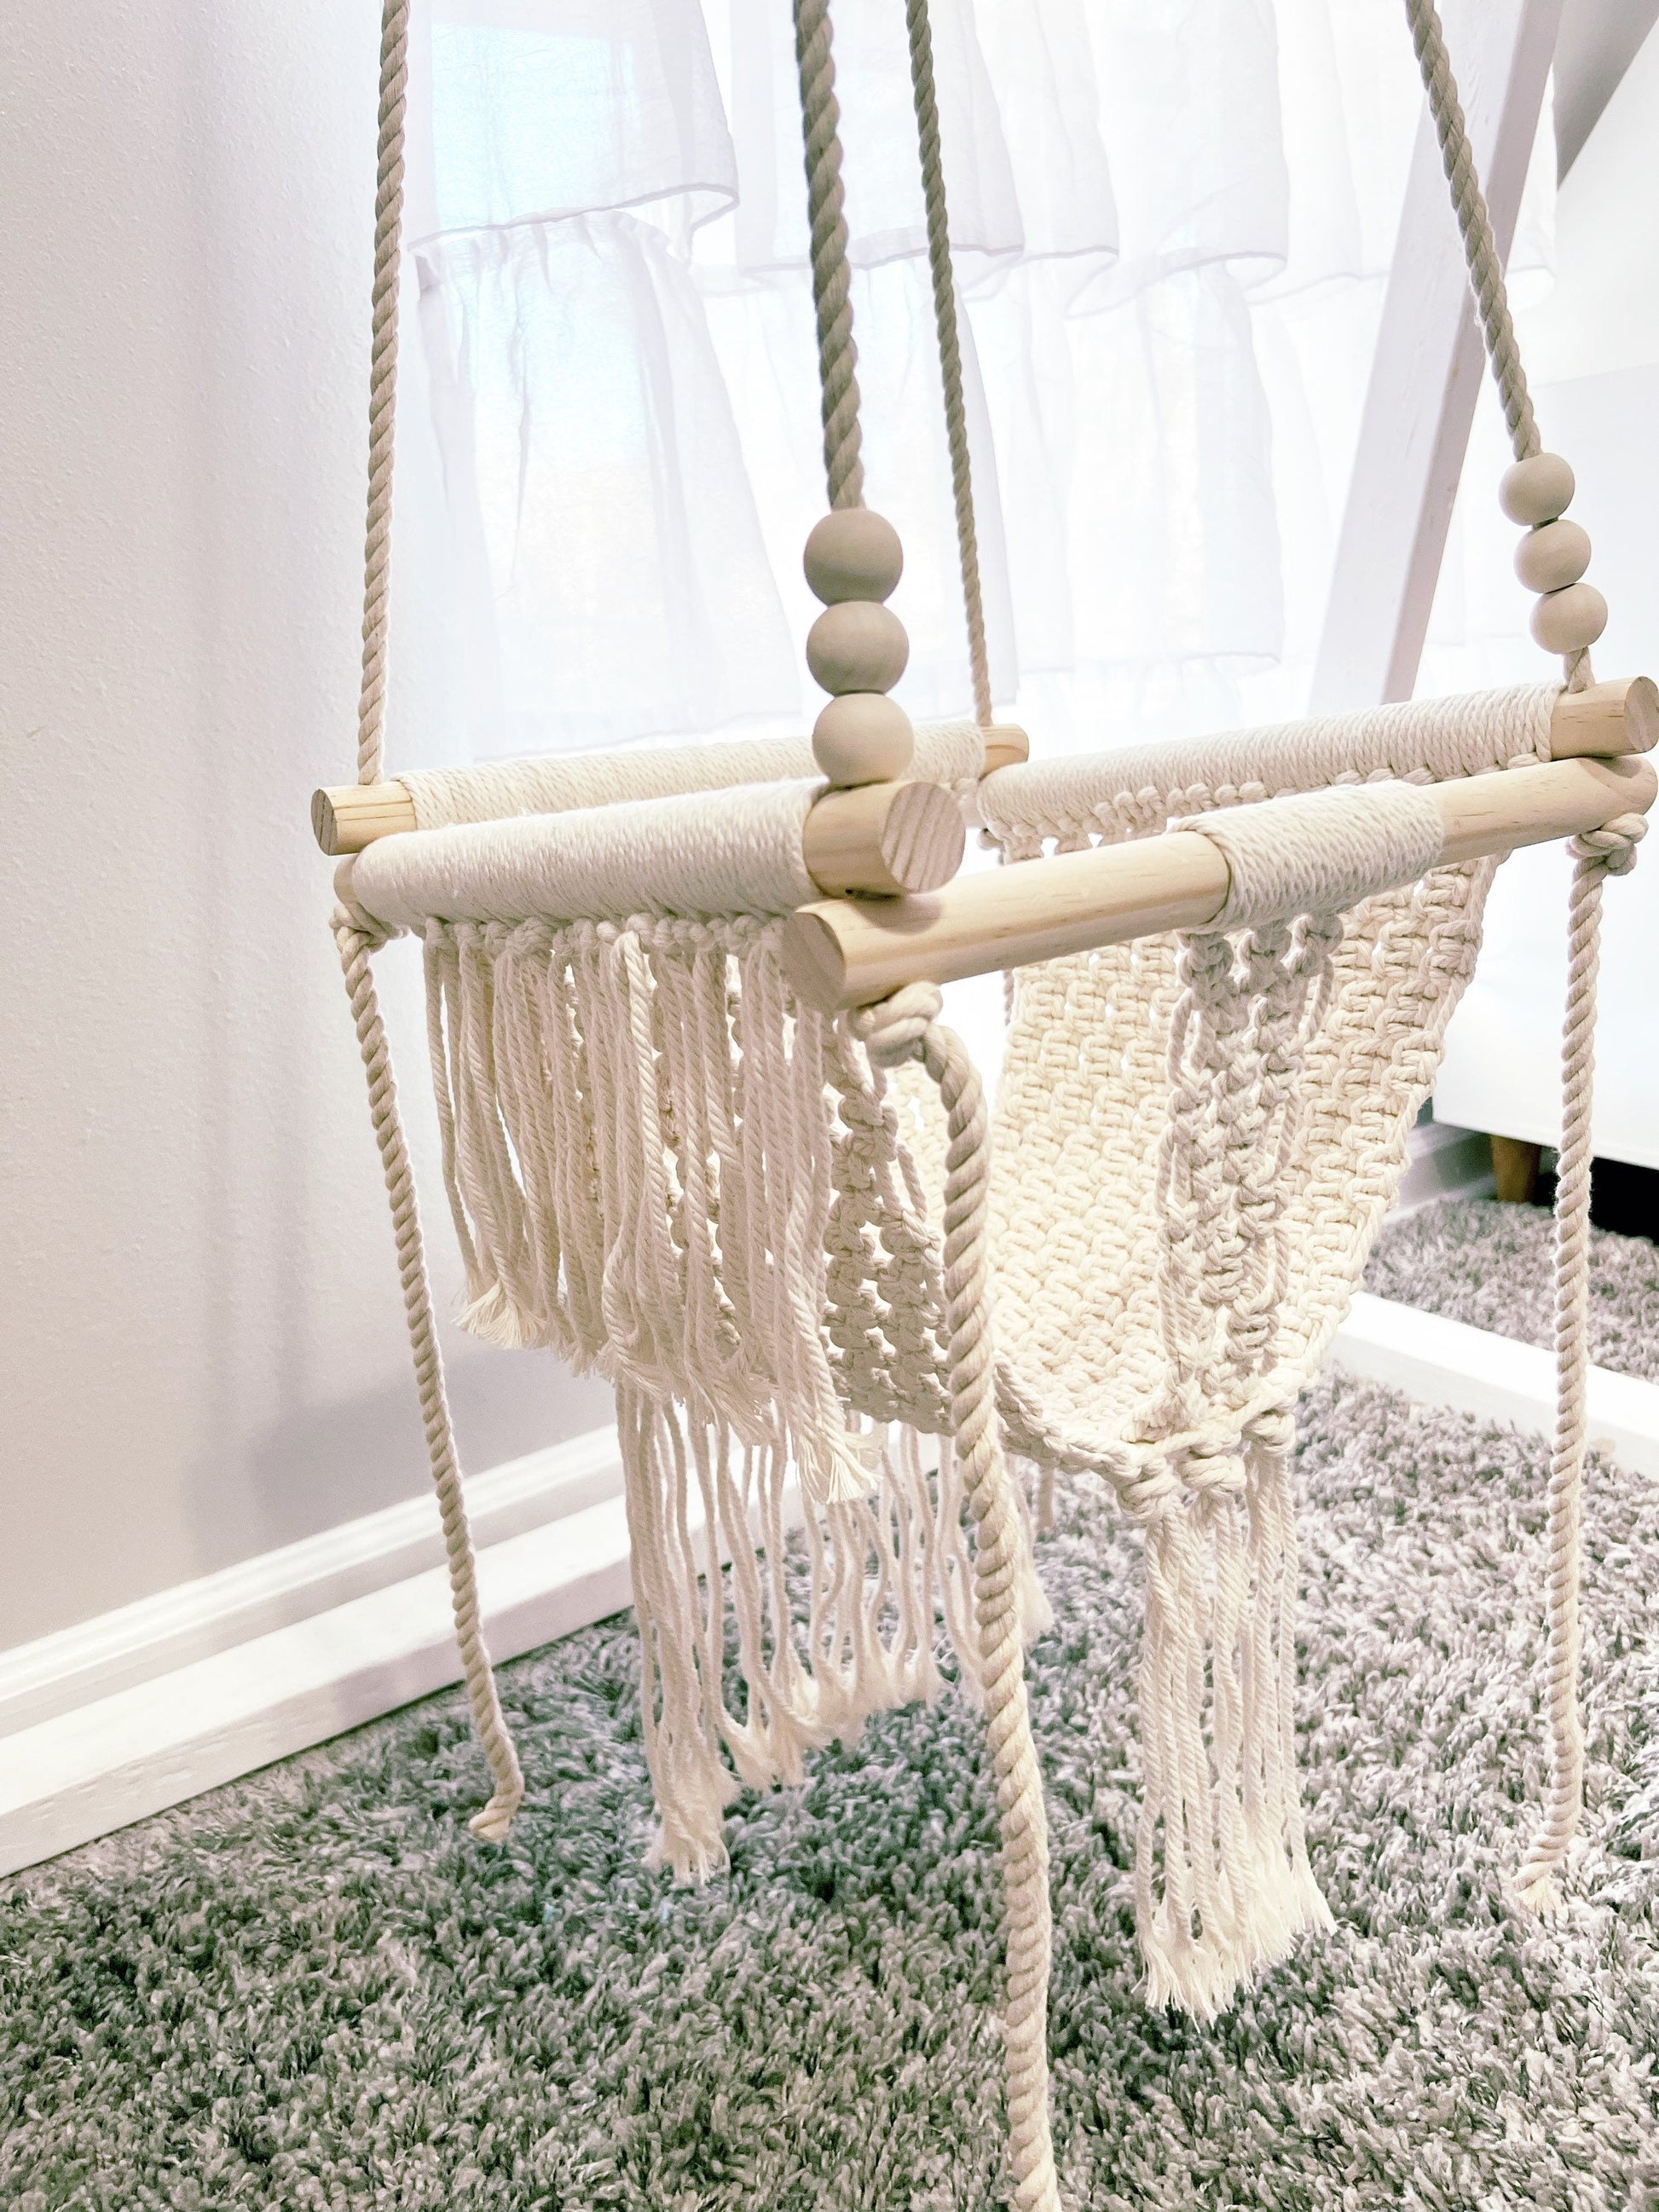 NO STAND AVAILABLE/ Macrame Baby Swing/Swing Only/ Stand is not included/